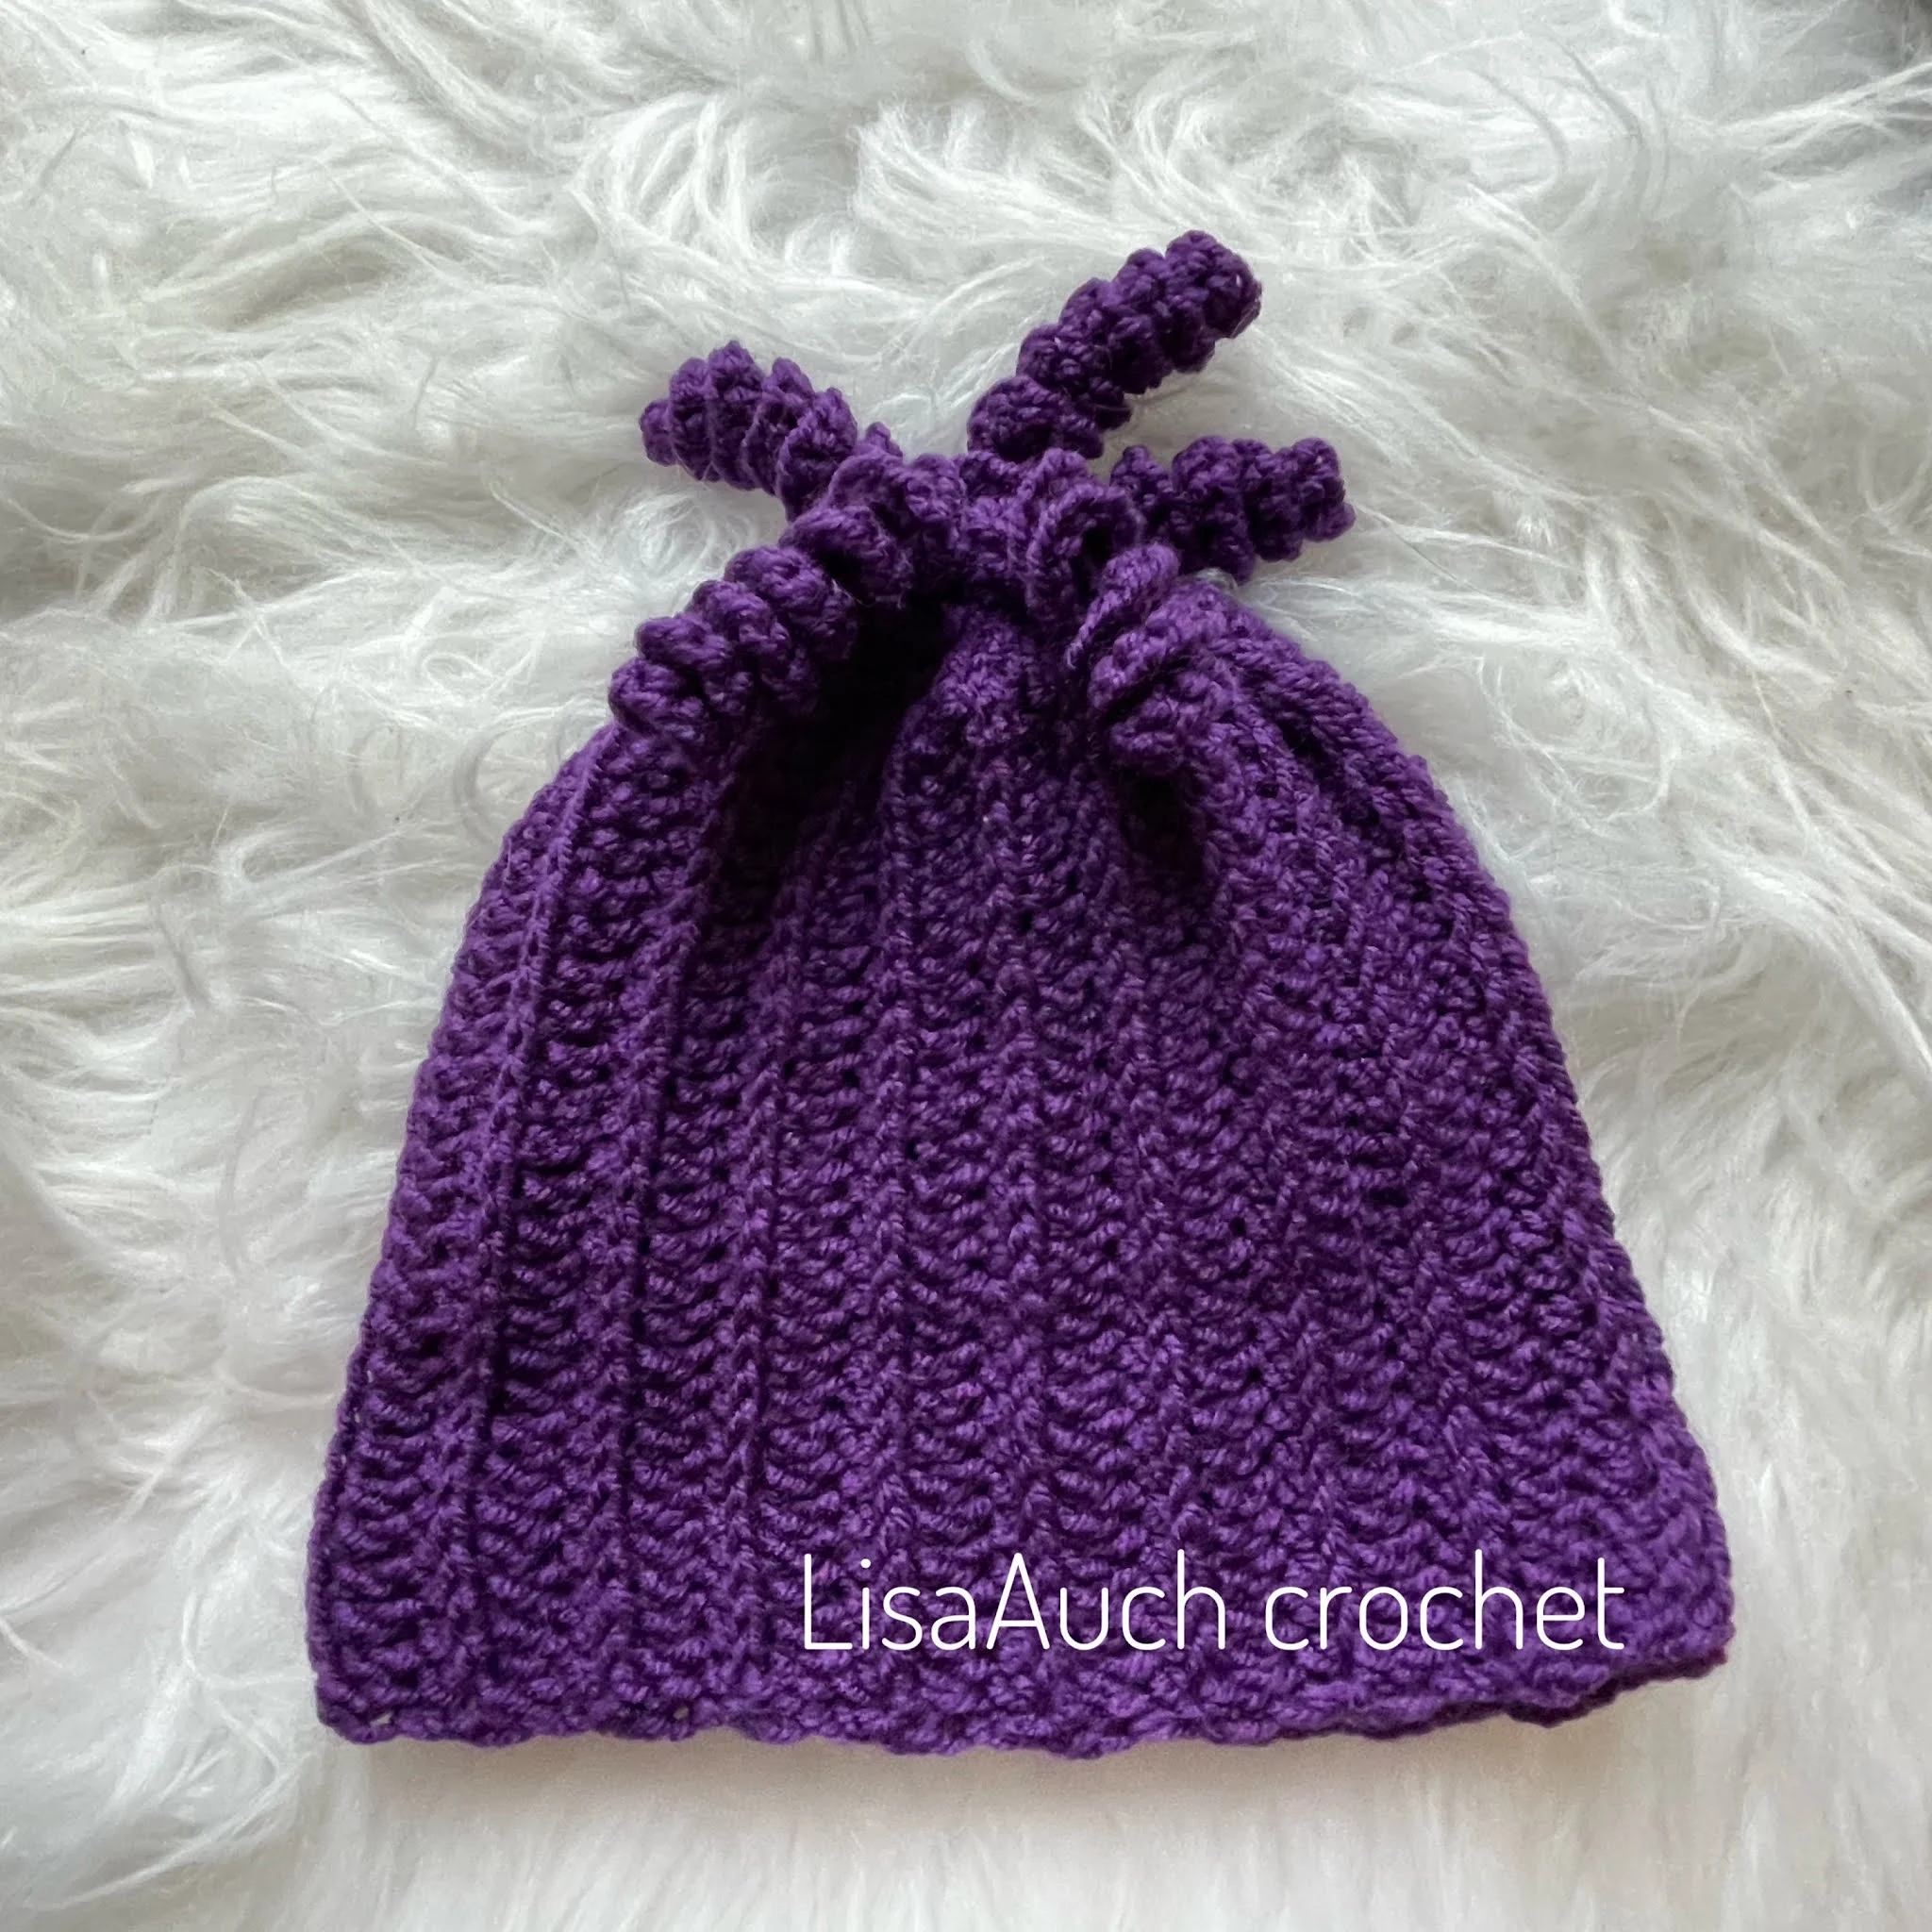 Ridge Crochet baby hat pattern by LisaAuch Crochet newborn crochet baby hat pattern FREE EASY crochet